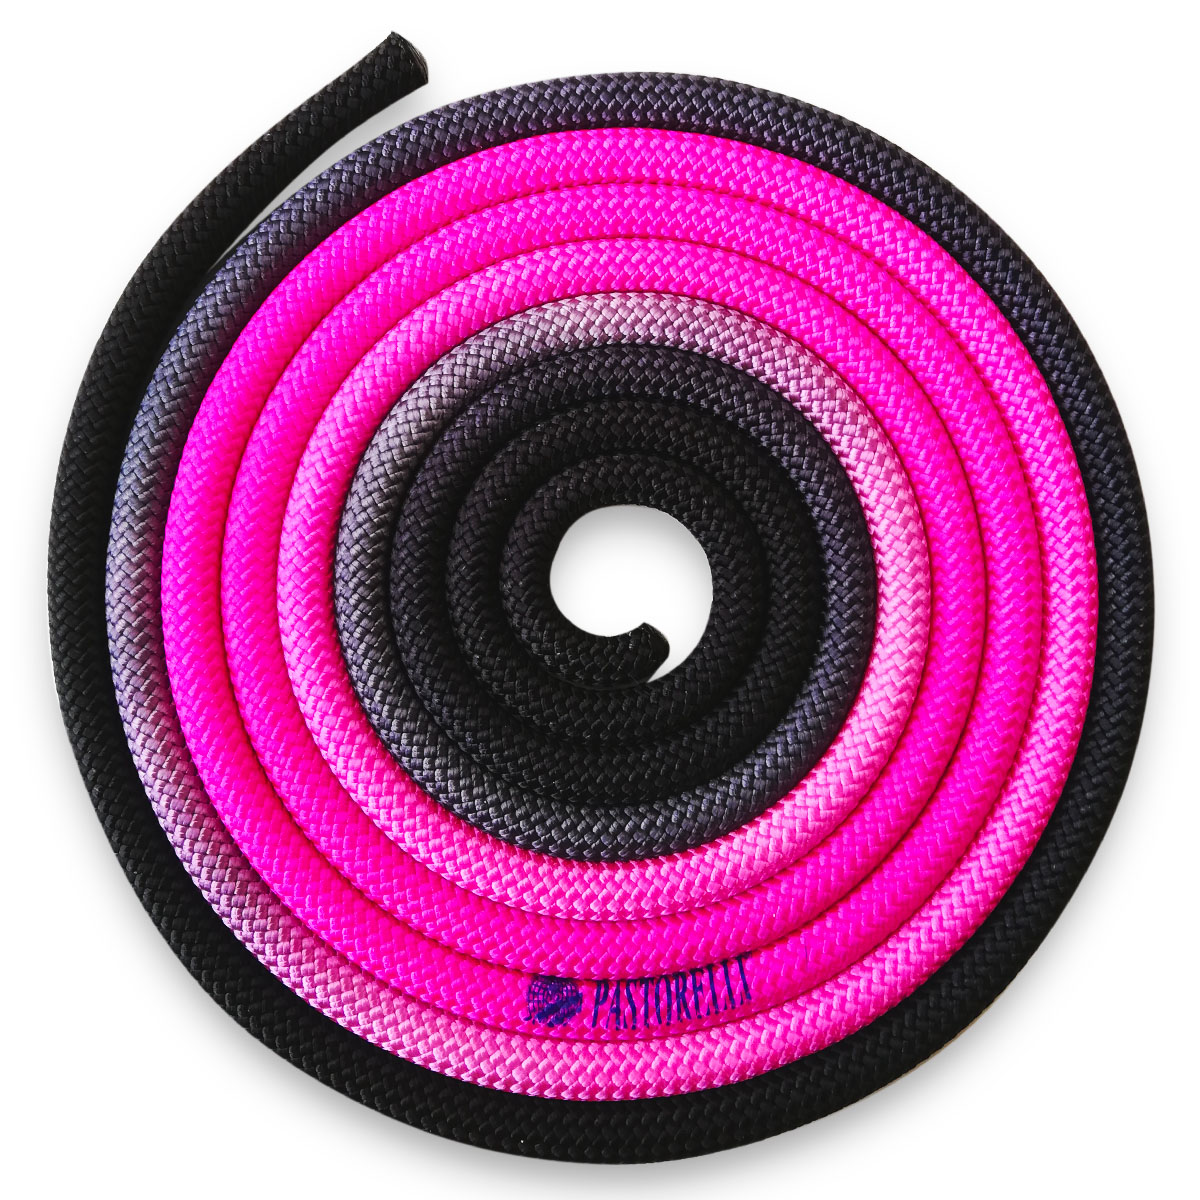 <p><strong><span style="color: rgb(0, 0, 0)">Pastorelli-New Orleans multicolor rope</span></strong></p>